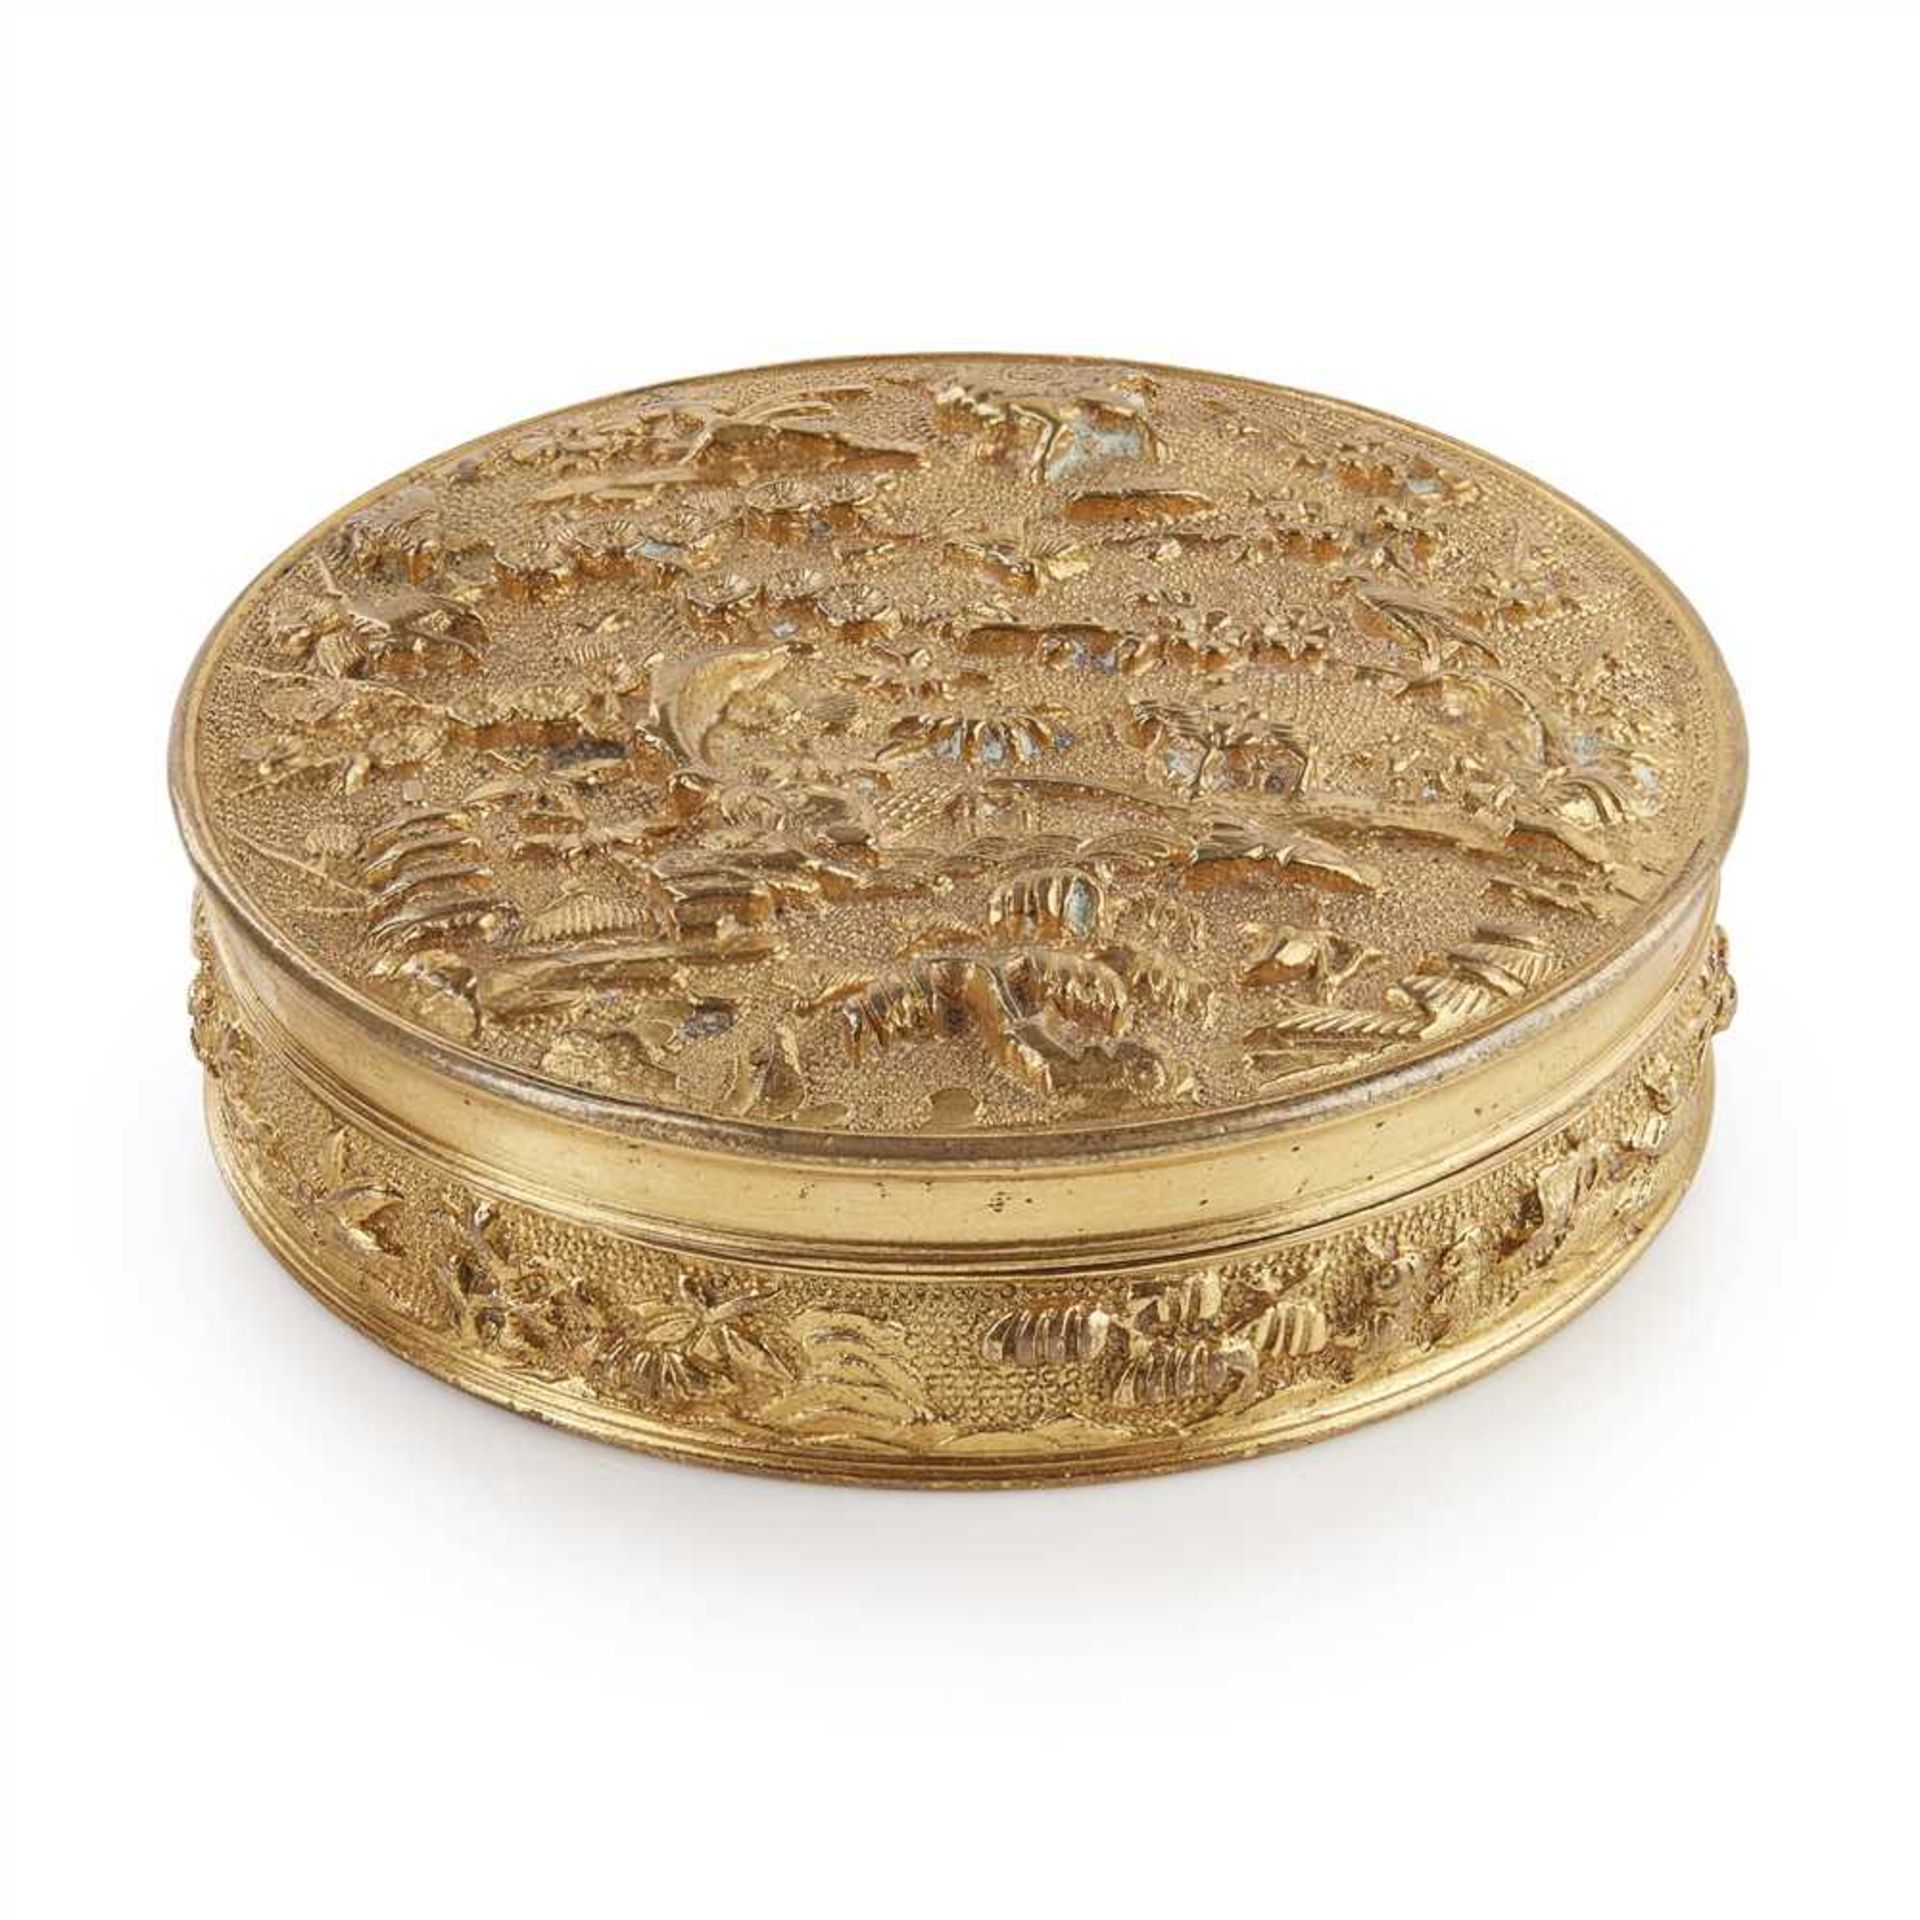 GILT-SILVER CIRCULAR BOX AND COVER QING DYNASTY, 18TH CENTURY